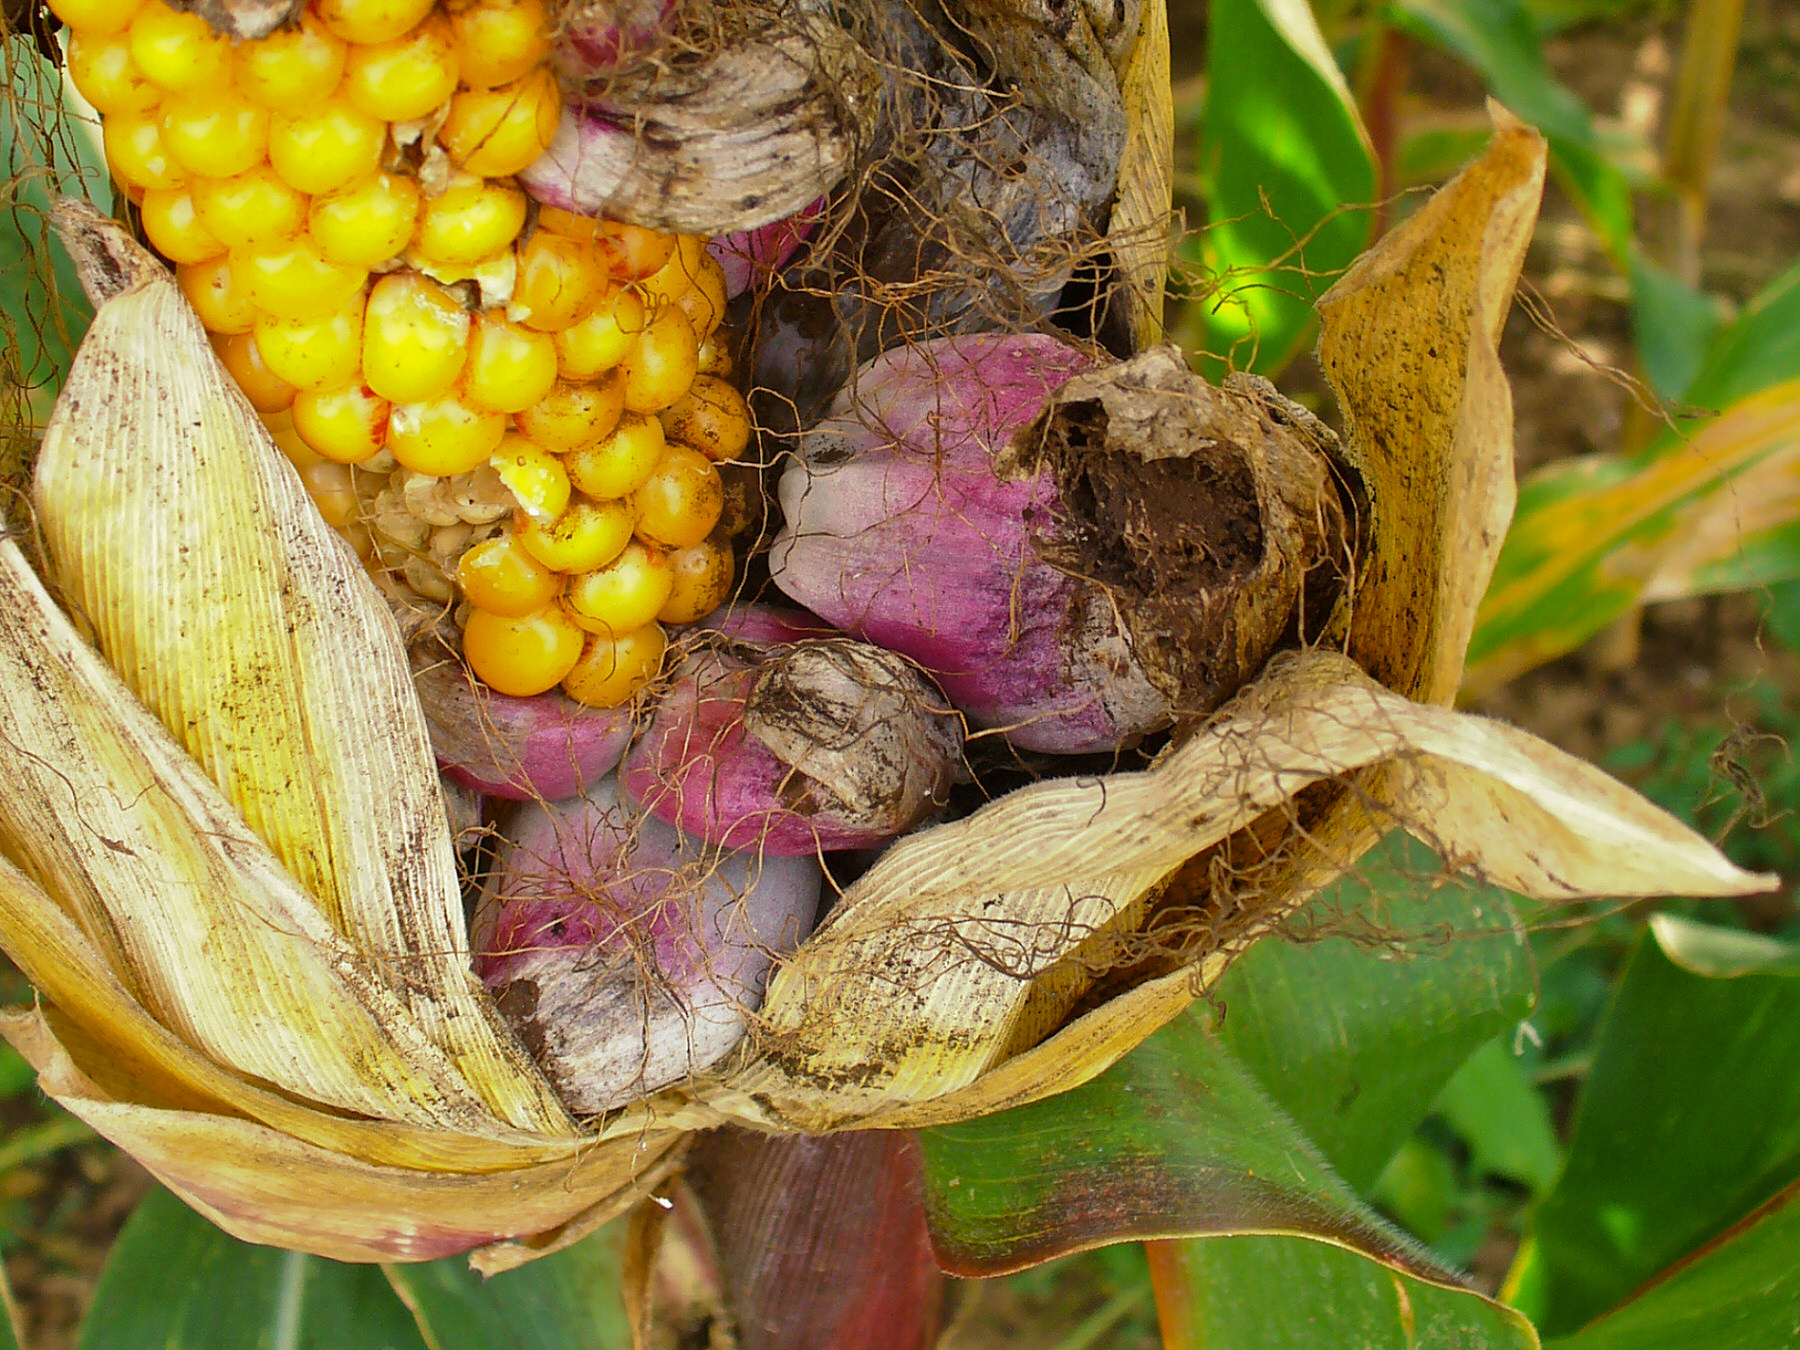 Several healthy corn kernels with a few large, pink swellings below them. One has burst, showing it is filled with powdery brown spores 